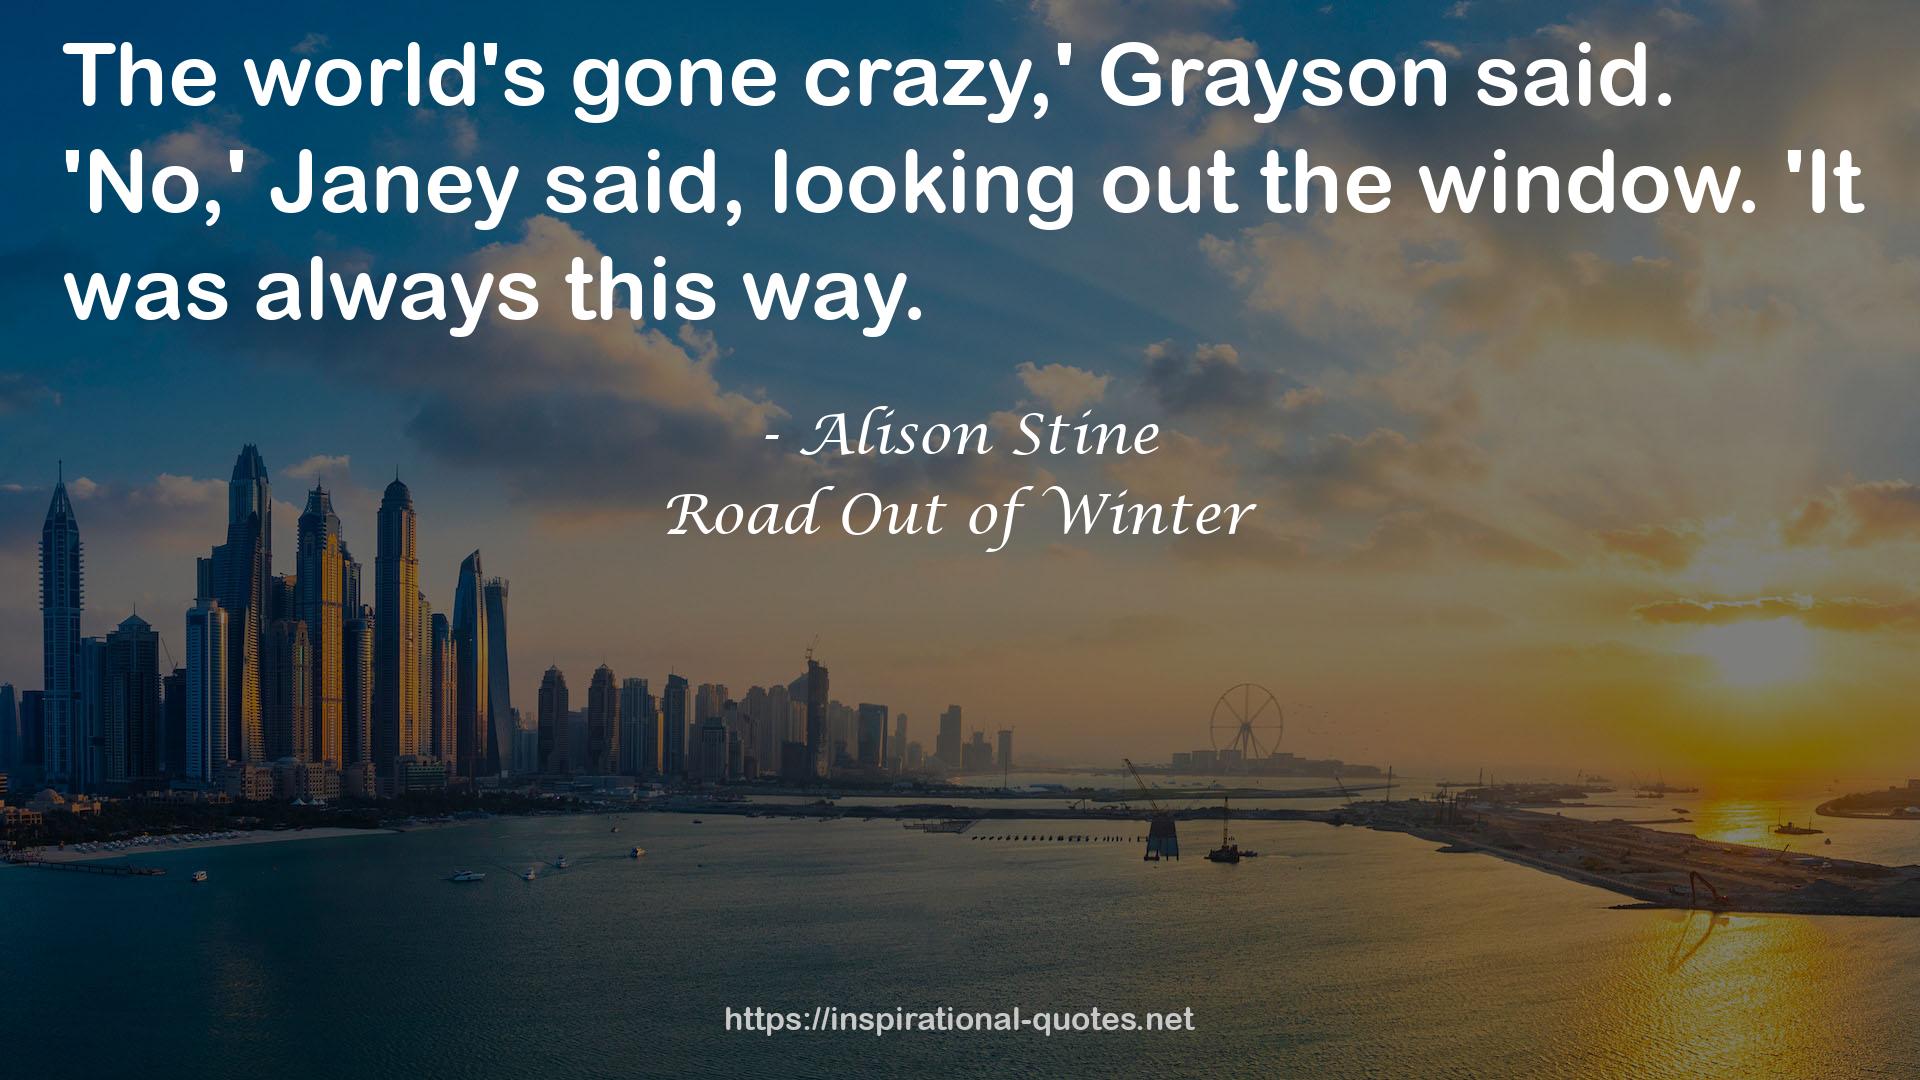 Road Out of Winter QUOTES